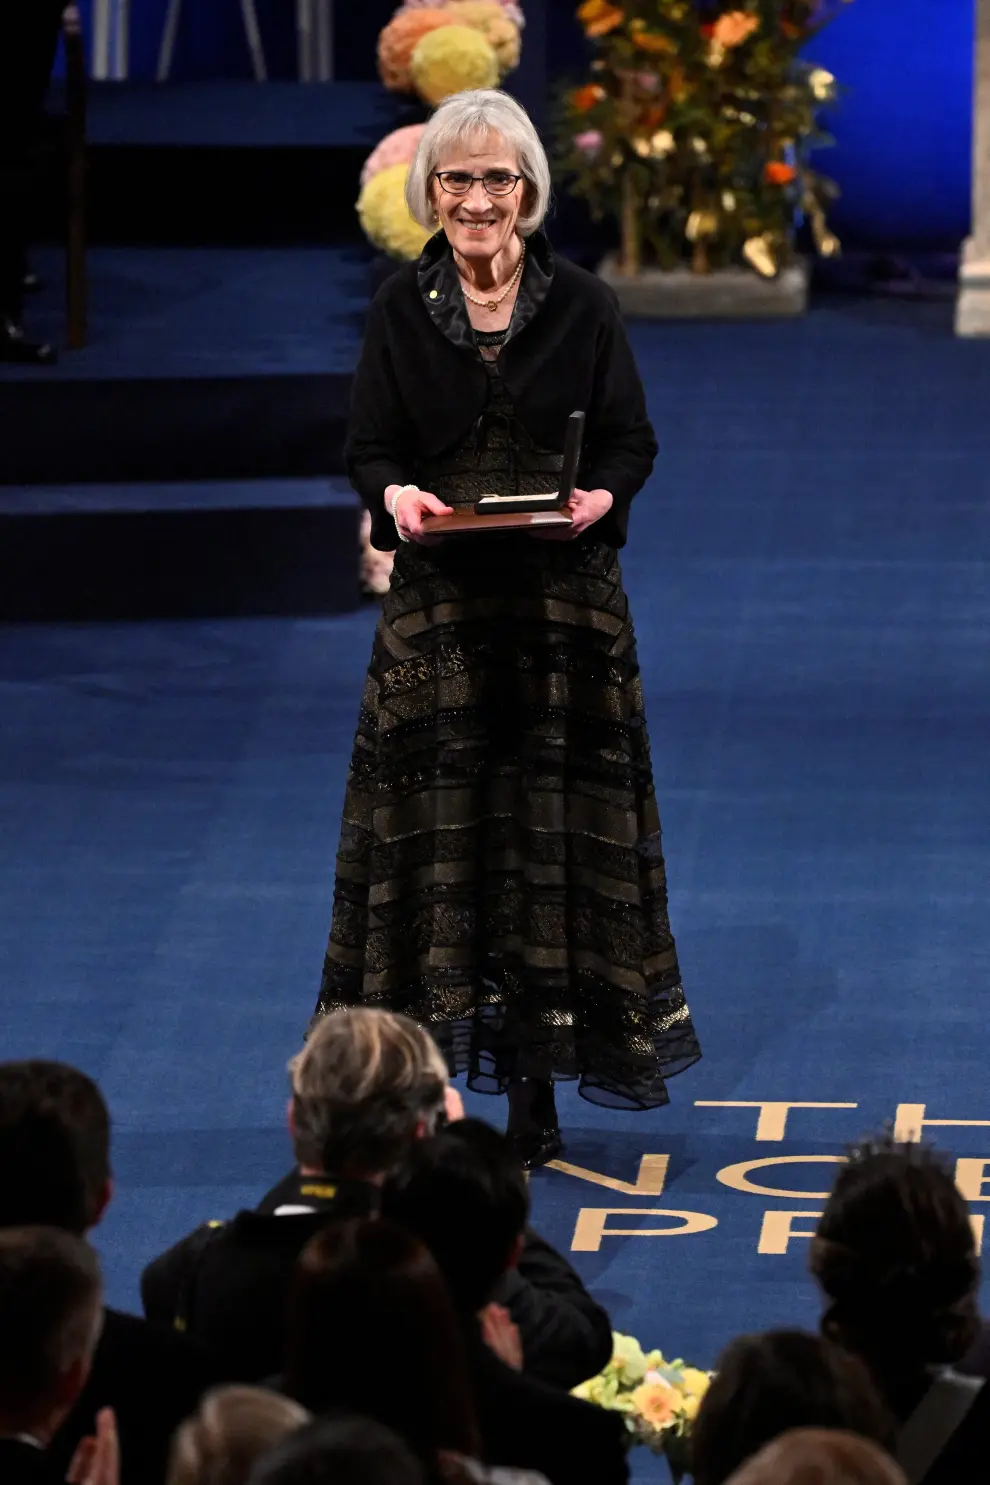 Claudia Goldin is awarded the Nobel Prize in Economic Sciences 2023 by King Carl Gustaf of Sweden during the Nobel Prize award ceremony in Stockholm, Sweden on December 10, 2023. Christine Olsson/TT News Agency/via REUTERS      ATTENTION EDITORS - THIS IMAGE WAS PROVIDED BY A THIRD PARTY. SWEDEN OUT. NO COMMERCIAL OR EDITORIAL SALES IN SWEDEN. [[[REUTERS VOCENTO]]] NOBEL-PRIZE/